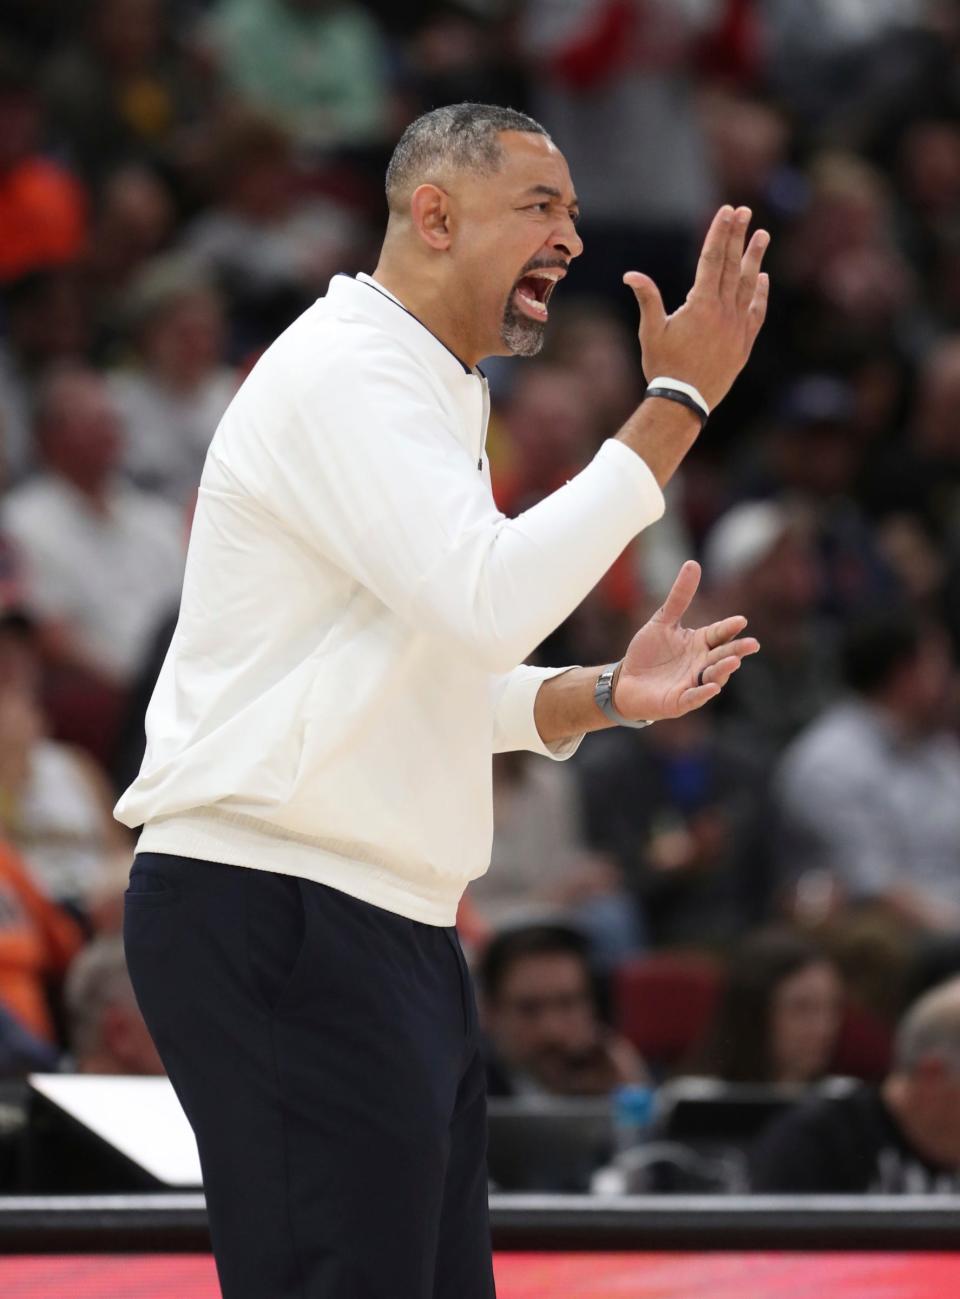 Michigan Wolverines head coach Juwan Howard on the bench during action vs. Rutgers in the Big Ten tournament at United Center in Chicago on Thursday, March 9, 2023.